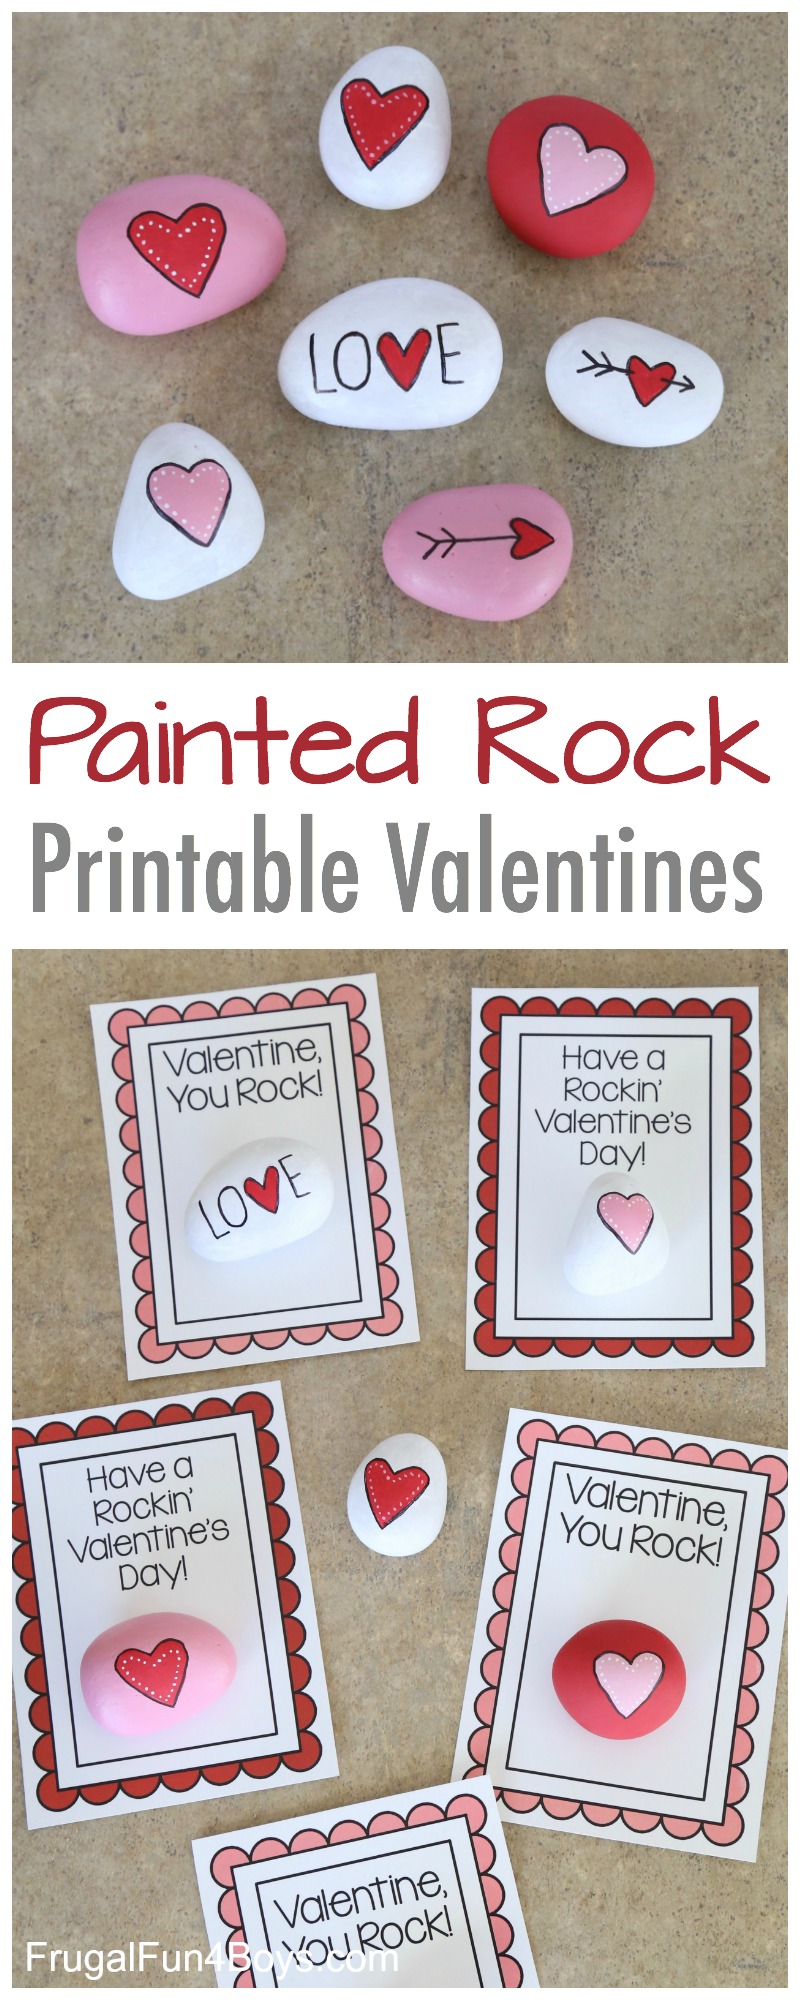 Painted Rock Printable Valentines Frugal Fun For Boys And Girls 333 x 425 jpeg 20 kb. painted rock printable valentines